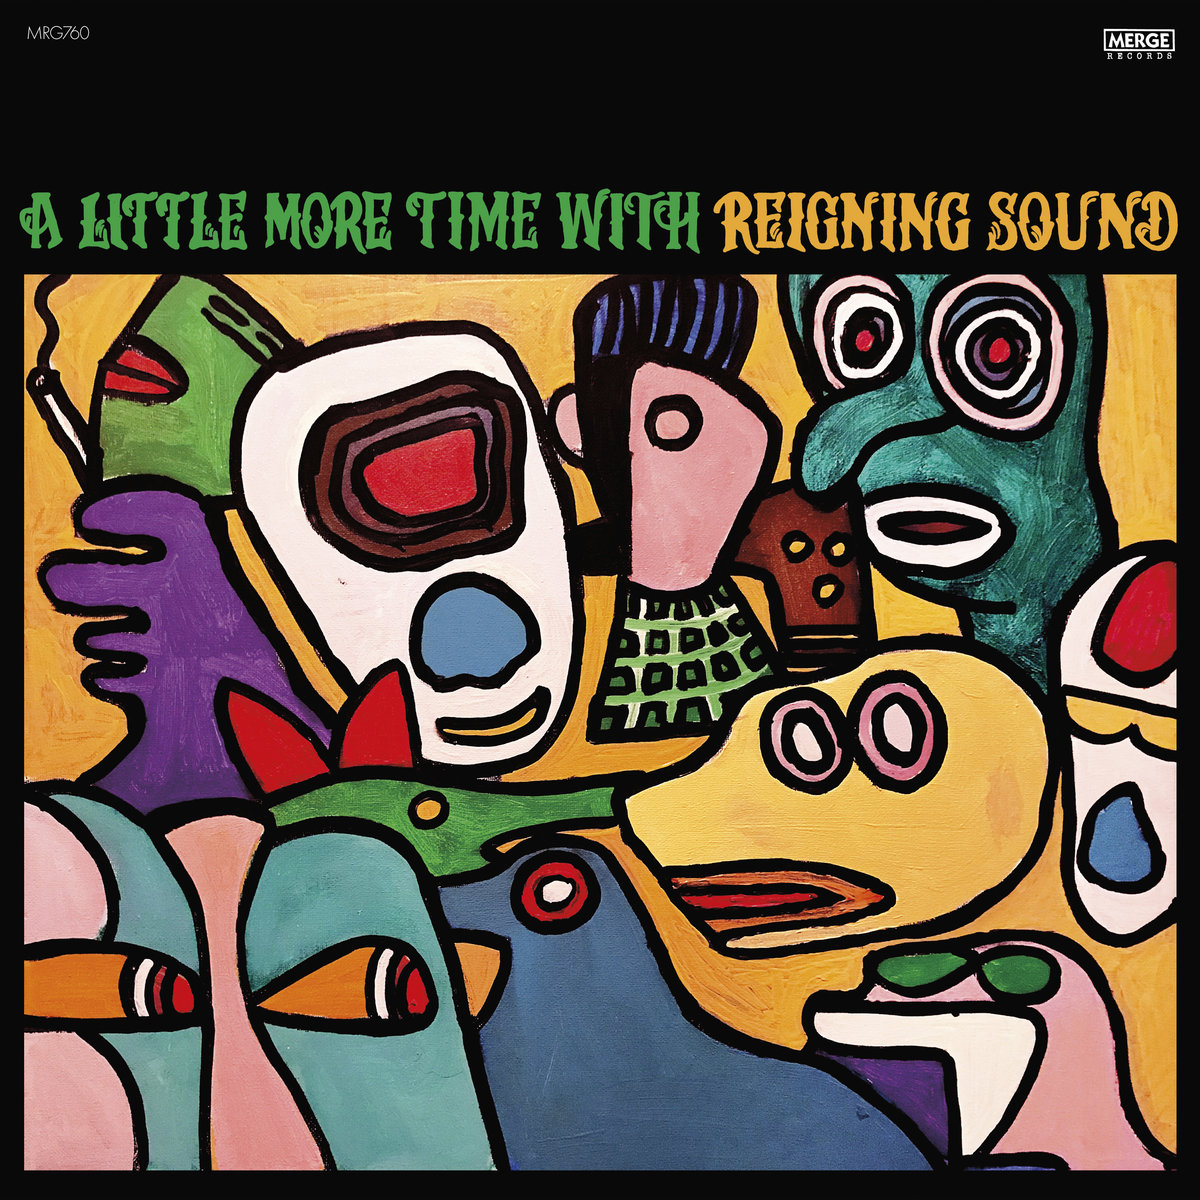 Reigning Sound - A Little More Time with Reigning Sound